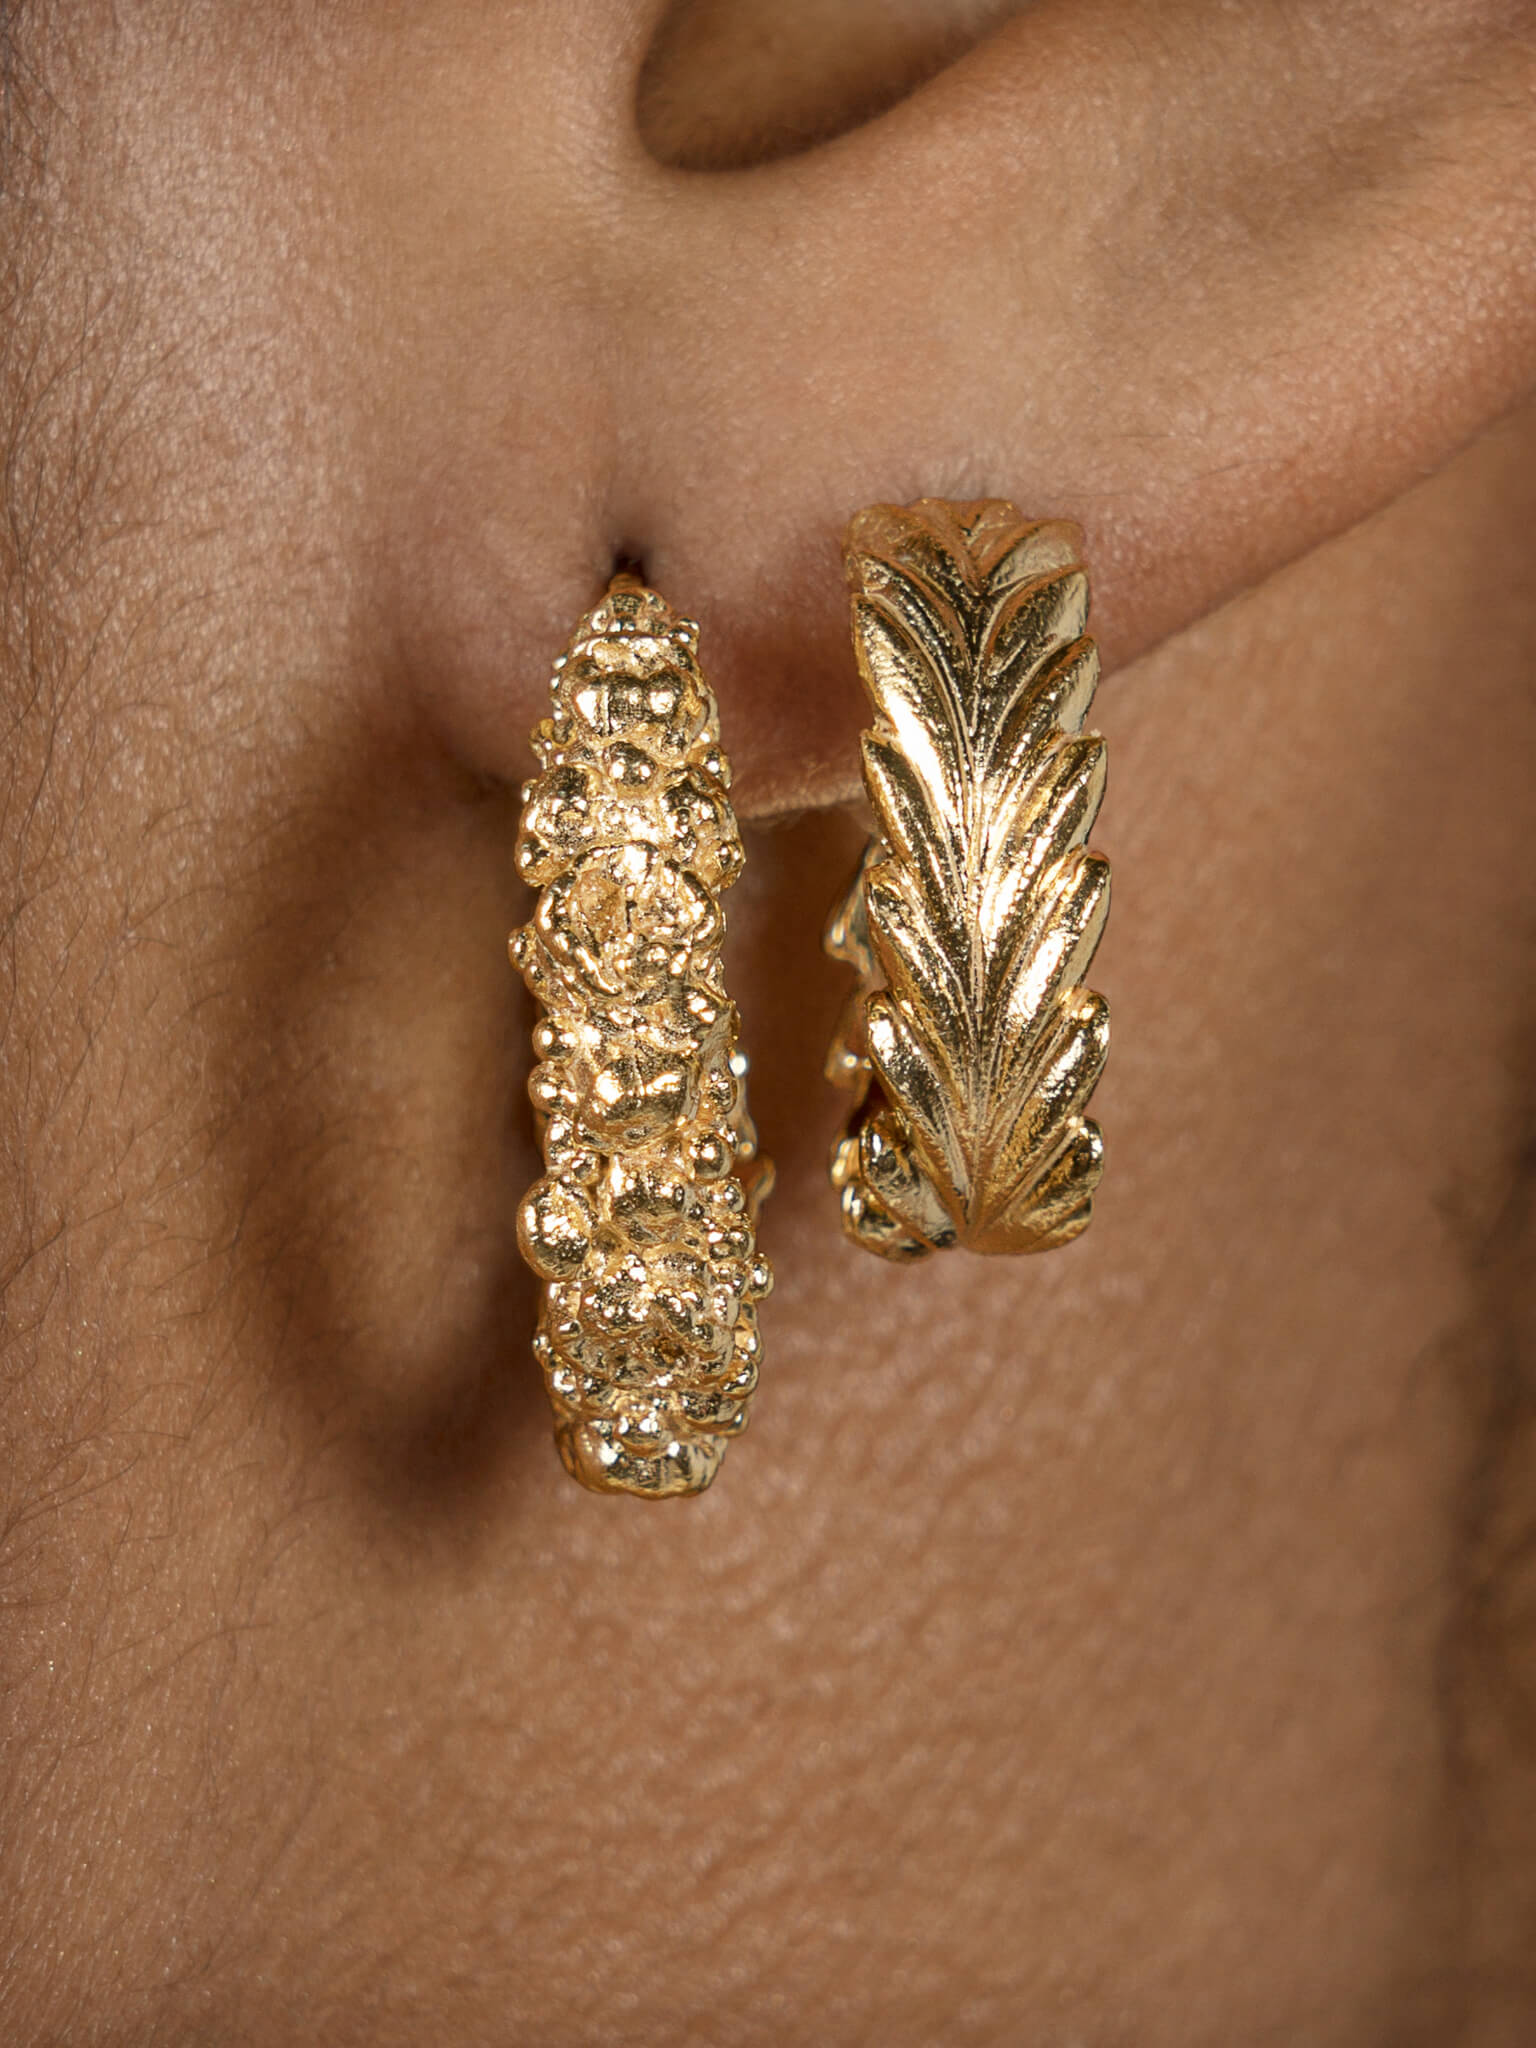 A close up of a woman's ear adorned with Cremilde Bispo Jewellery's Essential Leaf Hoops GP gold hoop earrings.